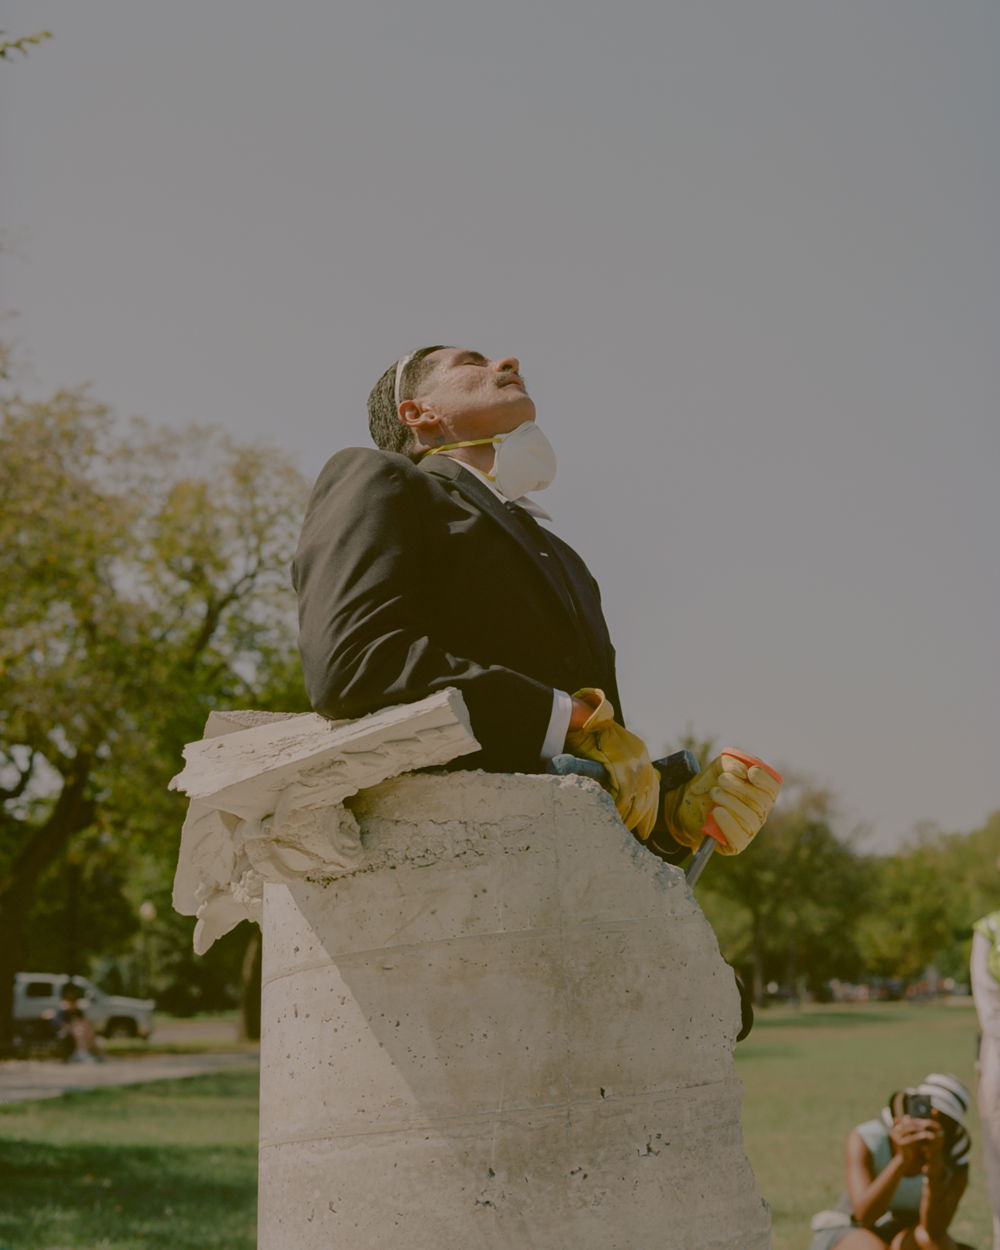 rafa is encased in a cement column from the waist down. He is wearing yellow work gloves and a protective facemask around his chin as he leans his face toward the sky.